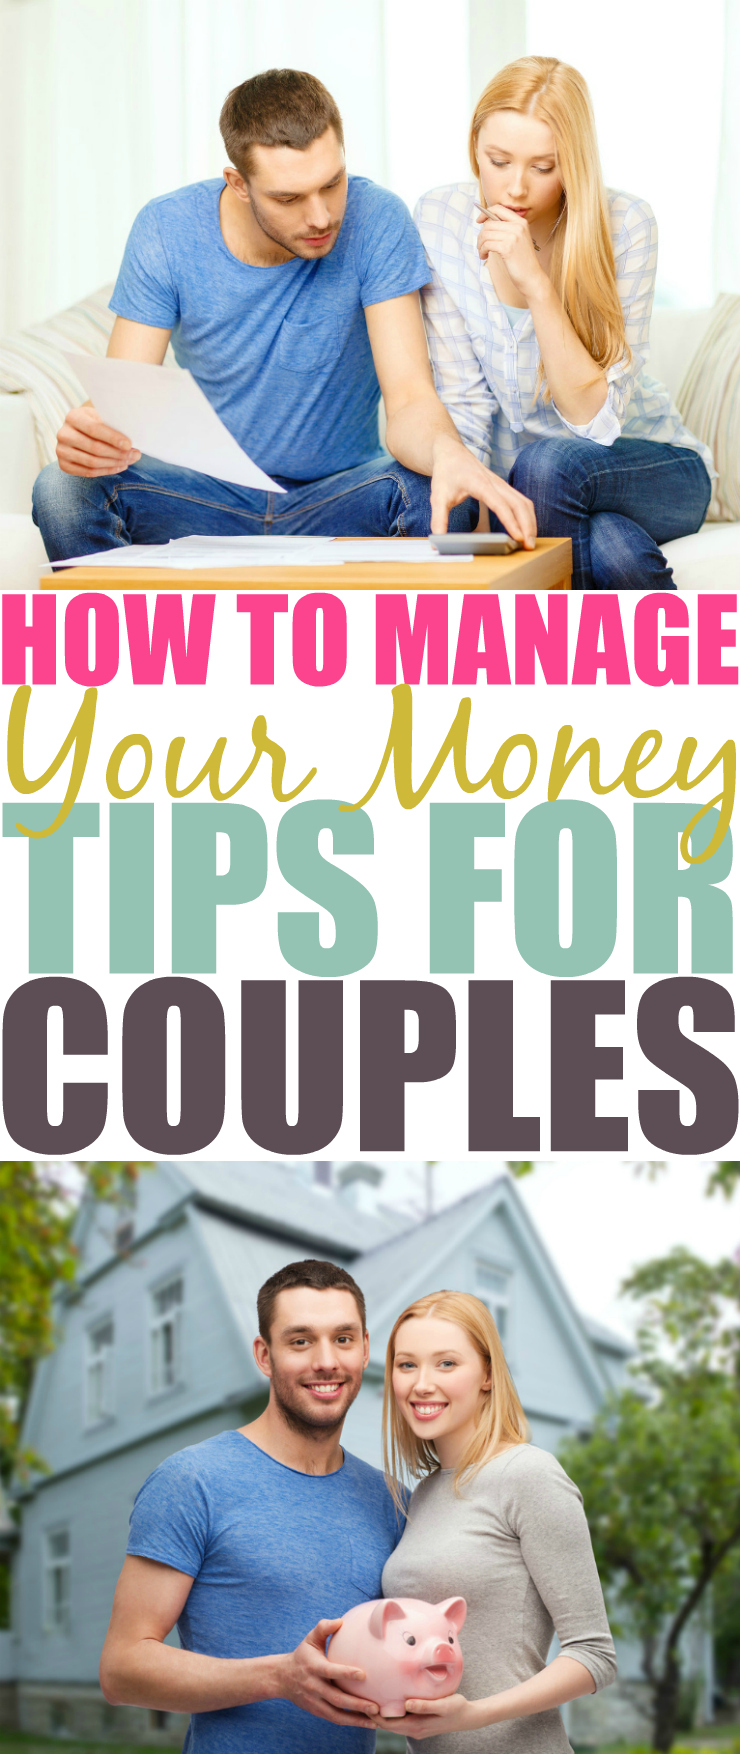 6 TIPS FOR MANAGING MONEY AS A COUPLE